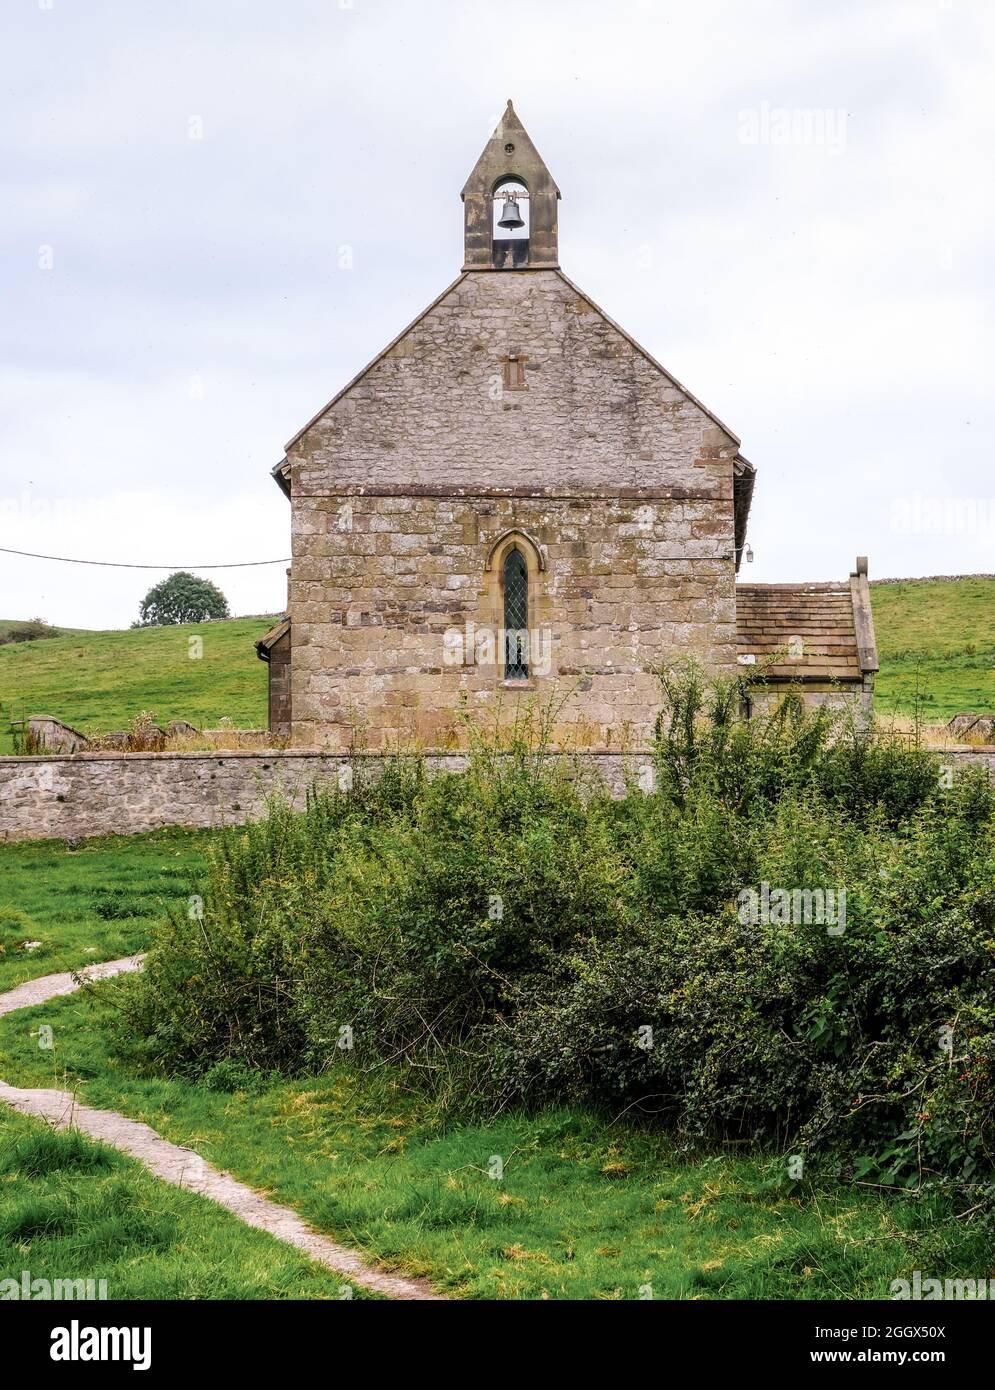 An end view of the ancient Ballidon church in the White Peak area of Derbyshire. Stock Photo